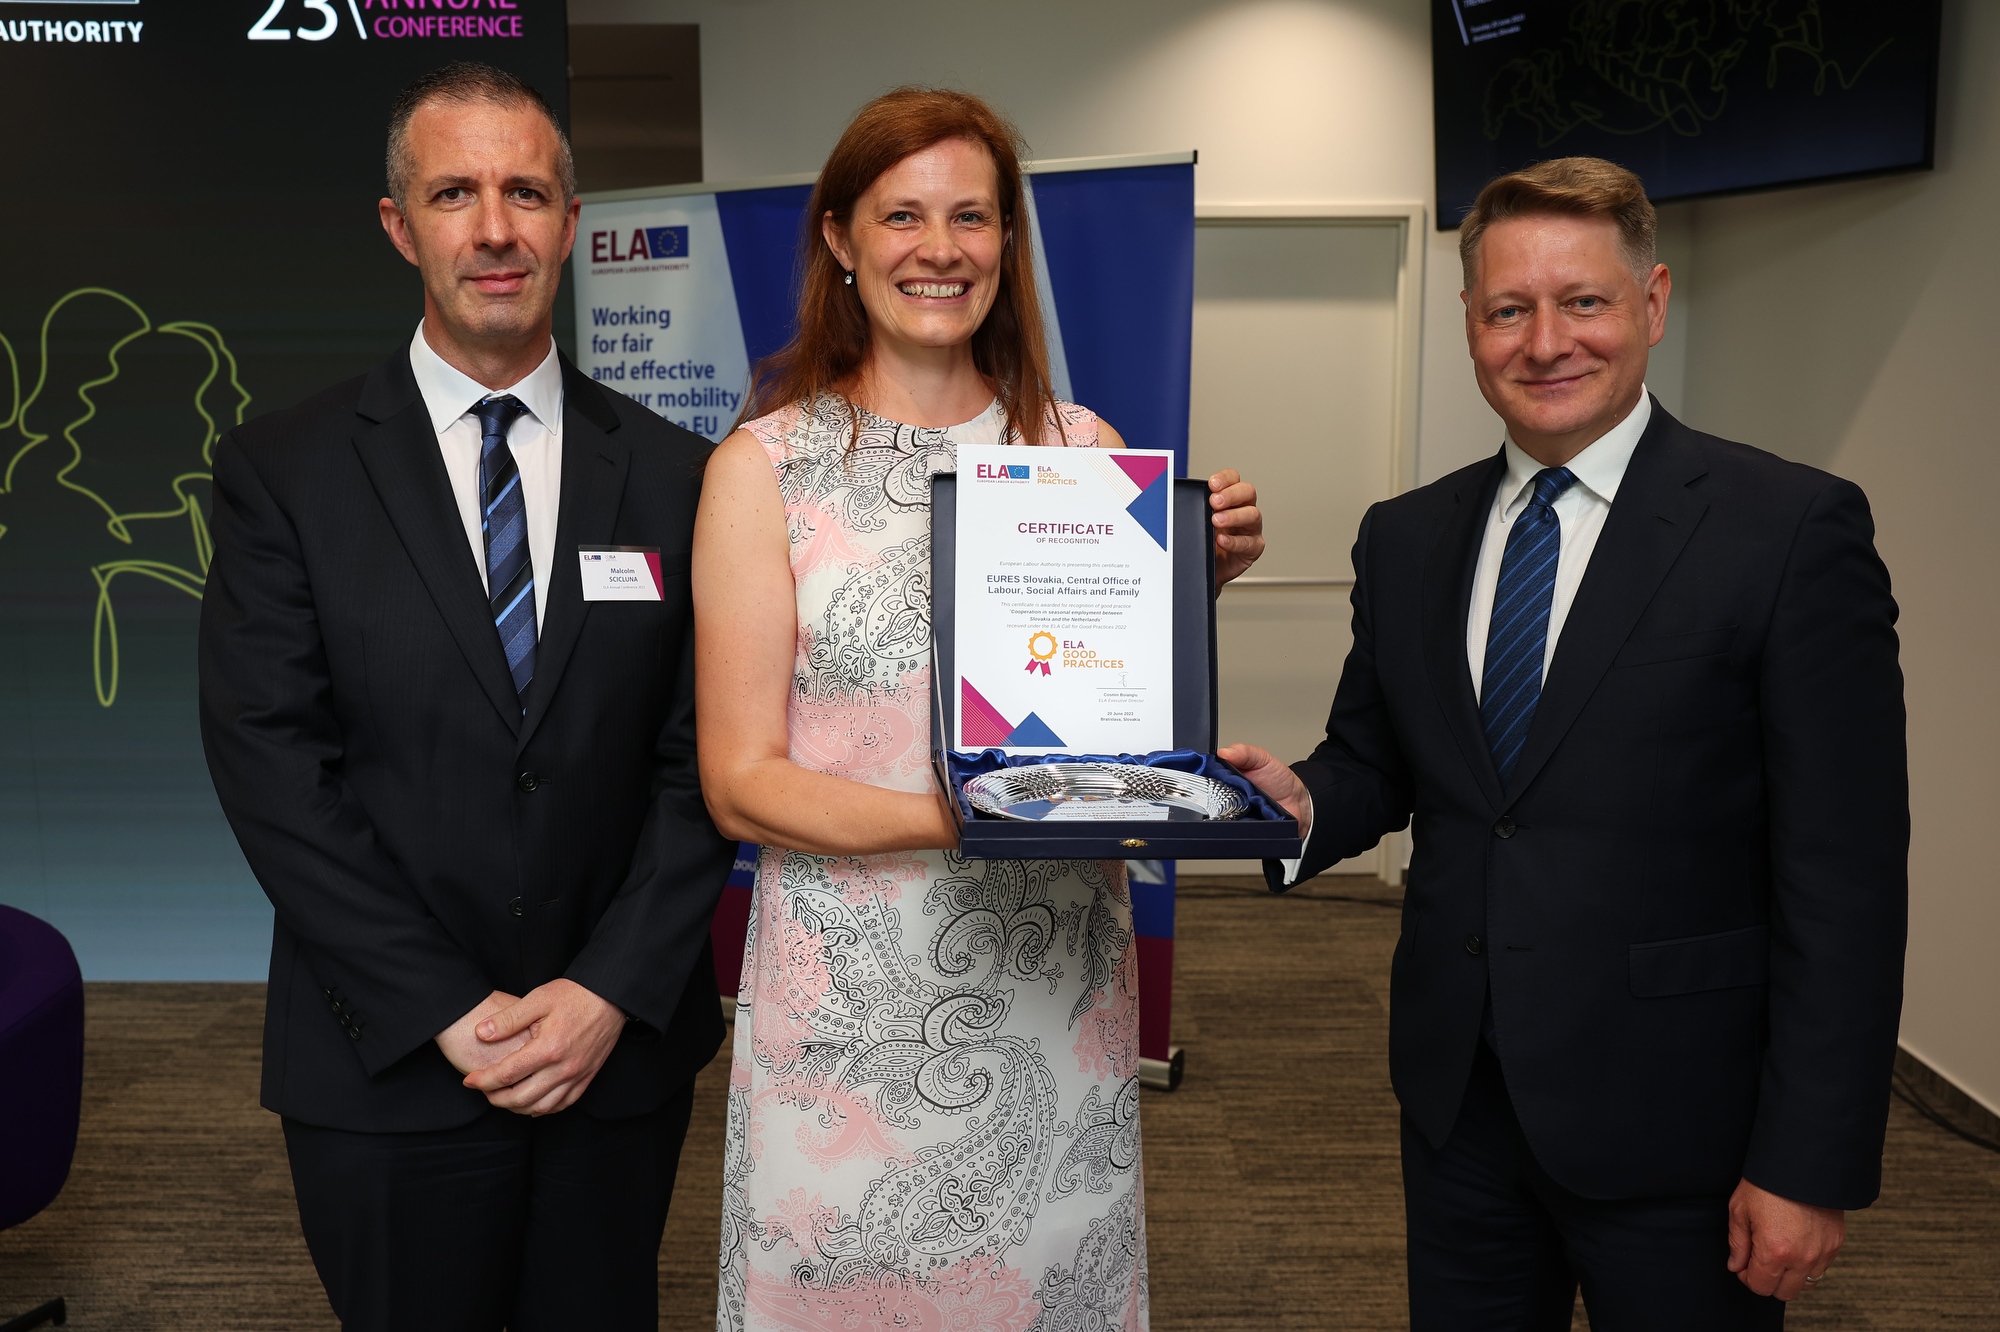 ELA's executive director and the head of cooperation support posing with the EURES Slovakia representative, receiving the Call for Good Practices award